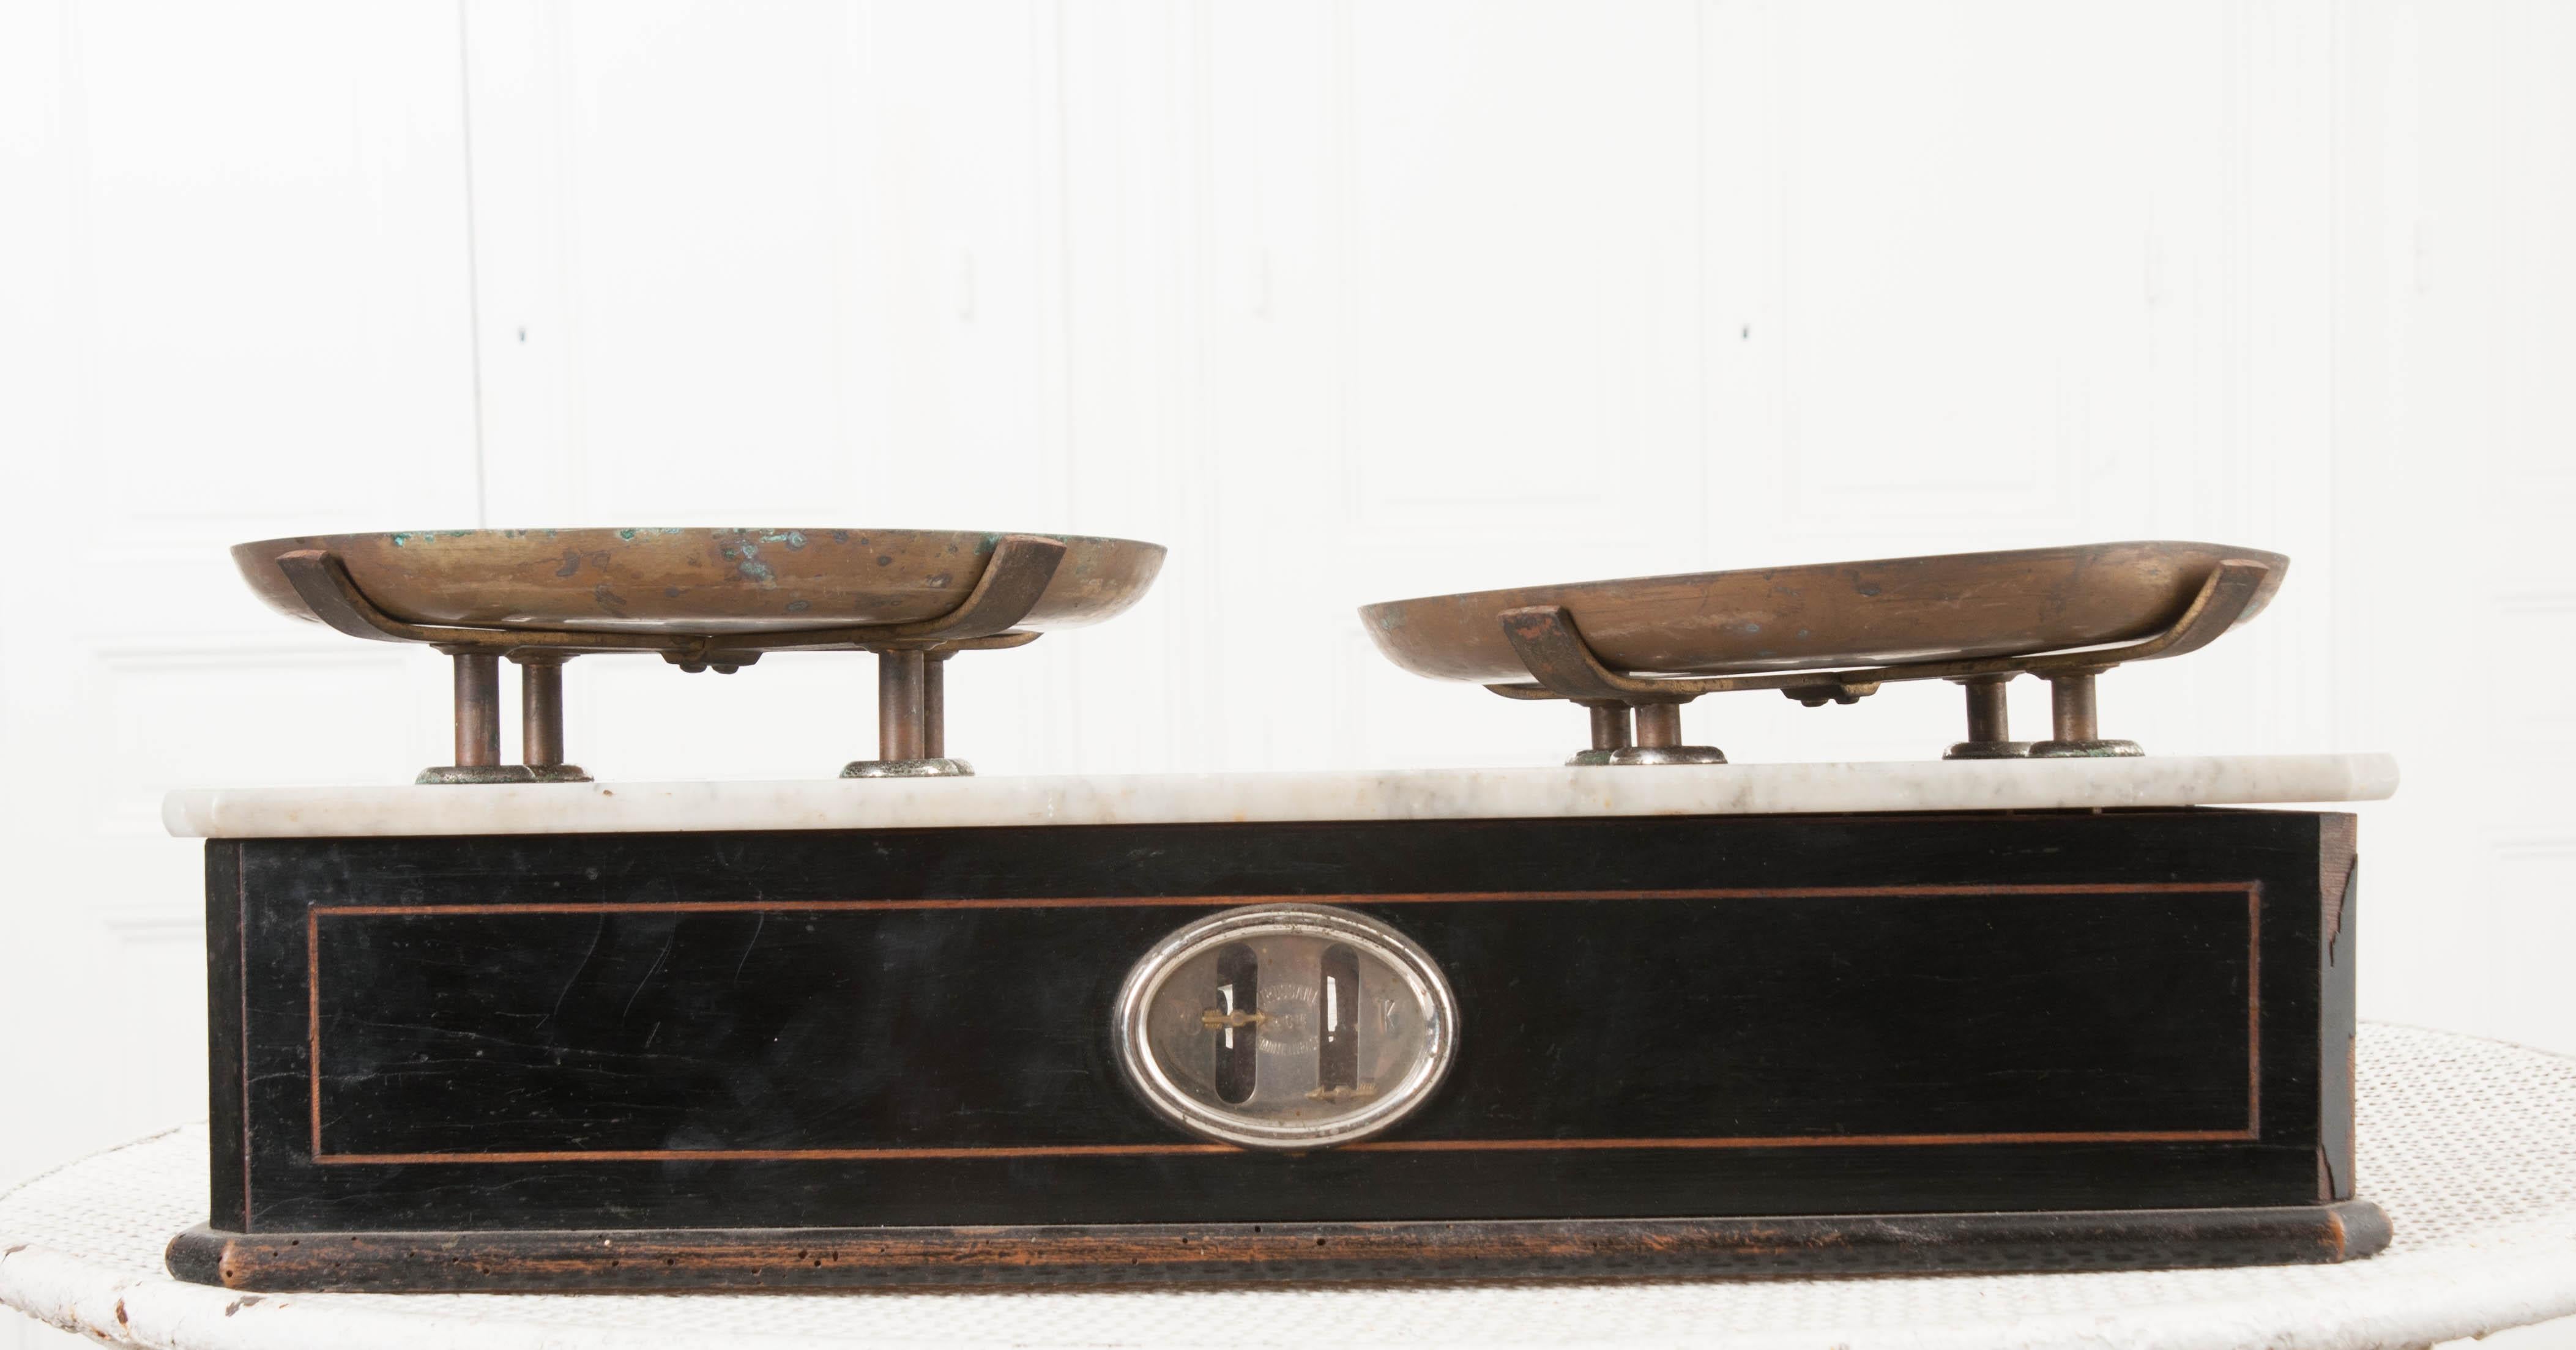 types of antique scales